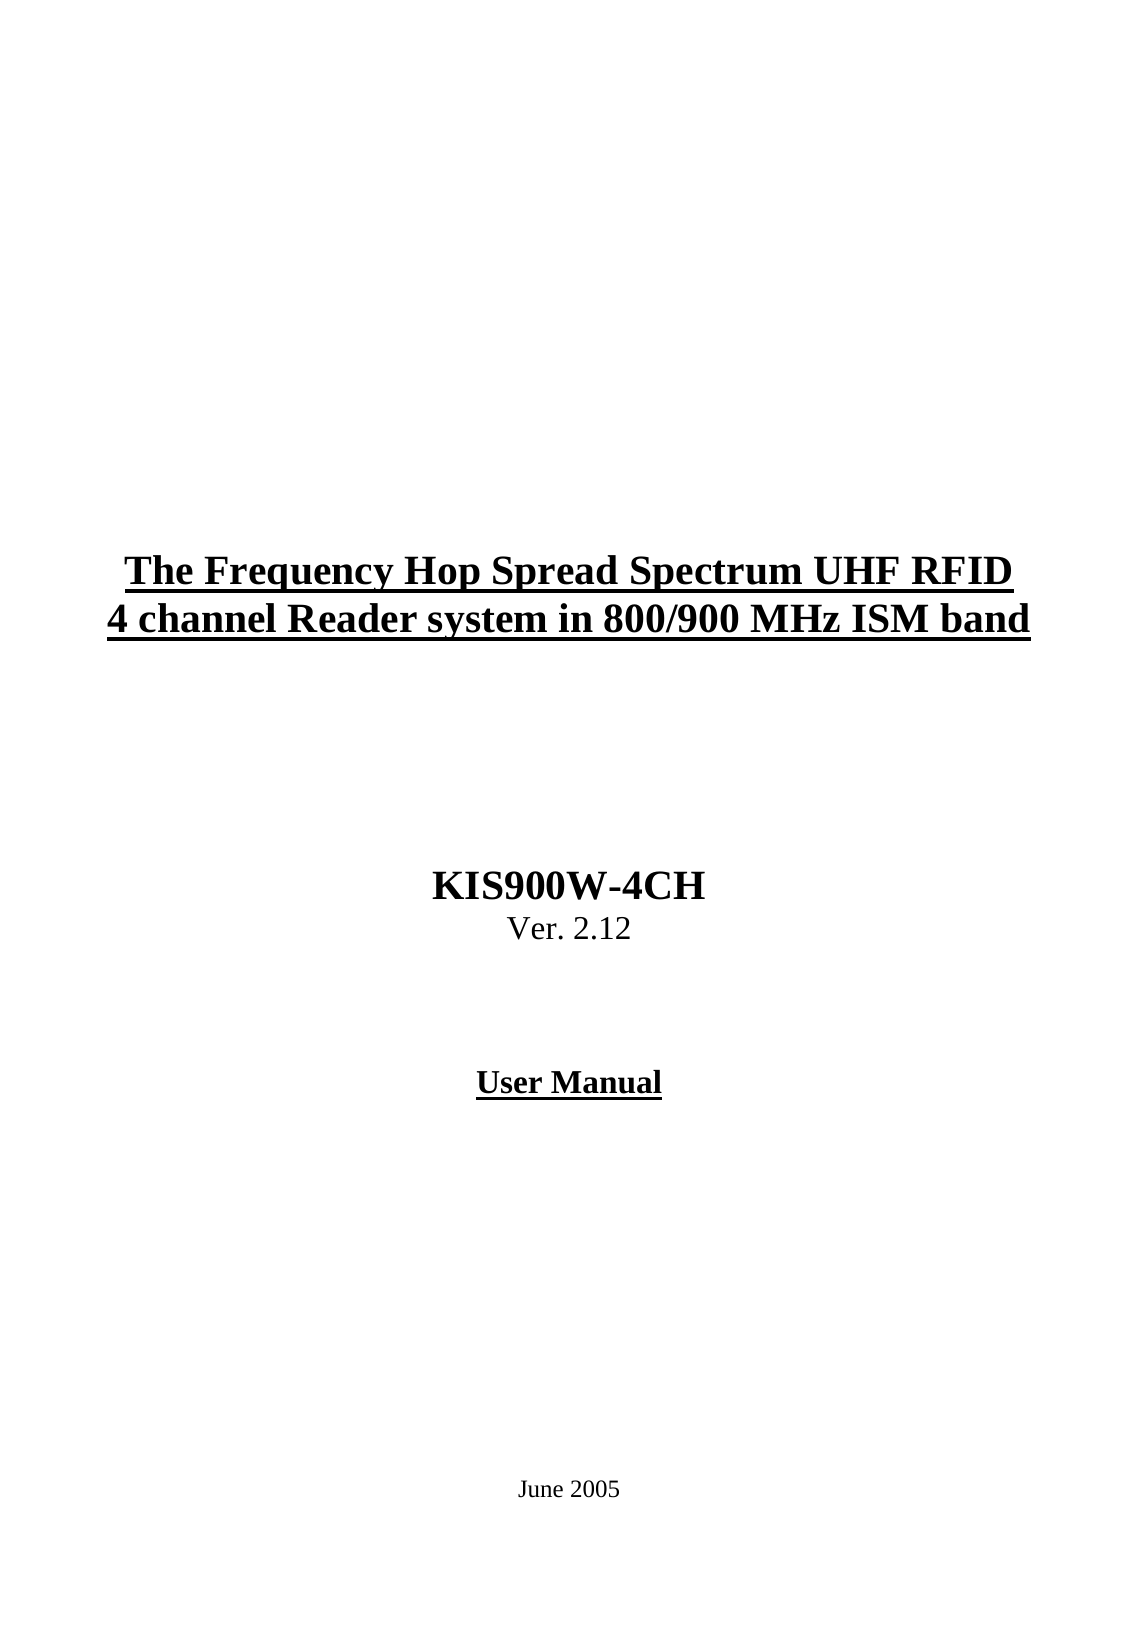                The Frequency Hop Spread Spectrum UHF RFID 4 channel Reader system in 800/900 MHz ISM band       KIS900W-4CH  Ver. 2.12     User Manual              June 2005  